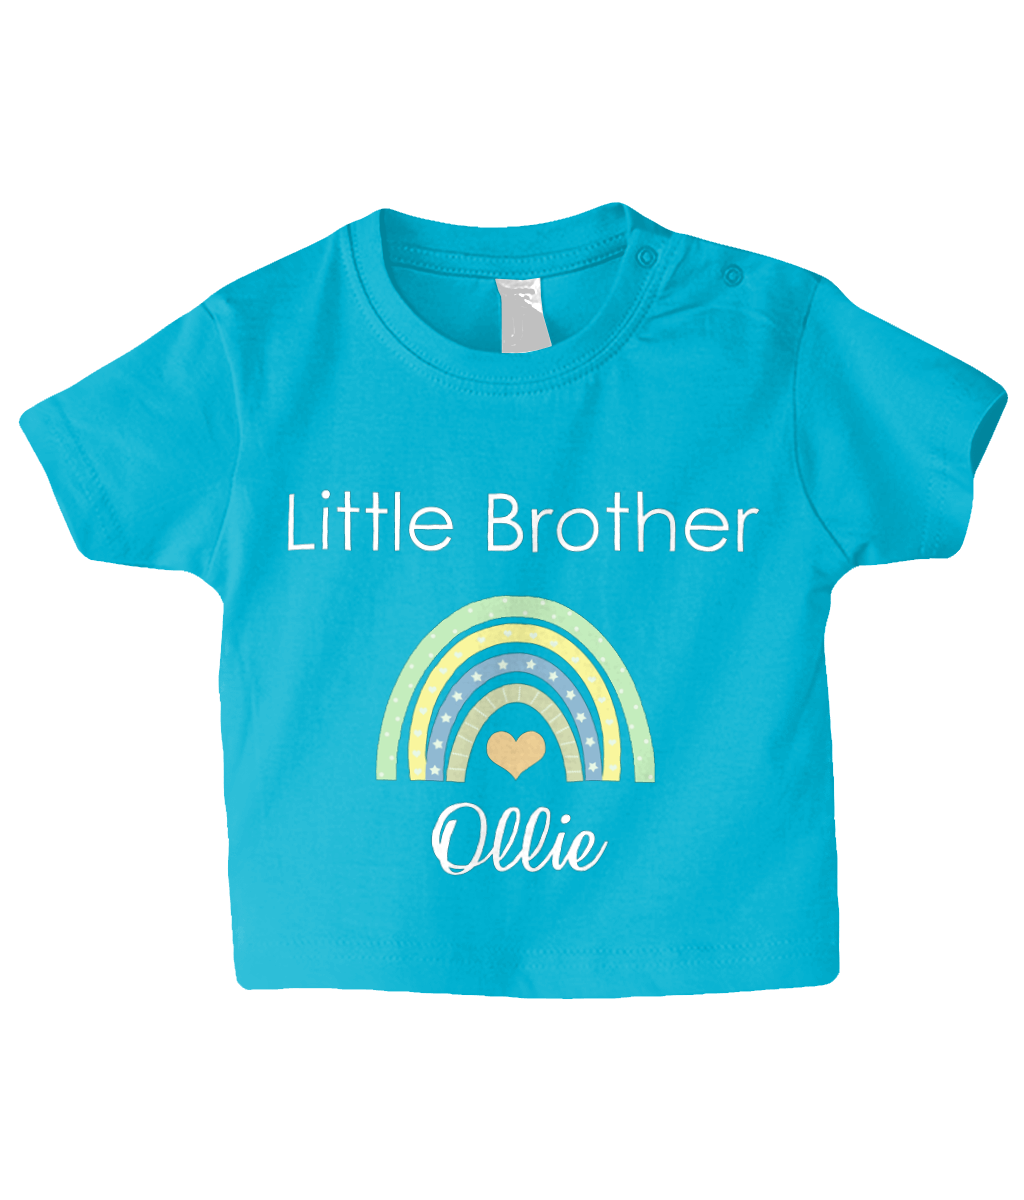 Little Brother Tee